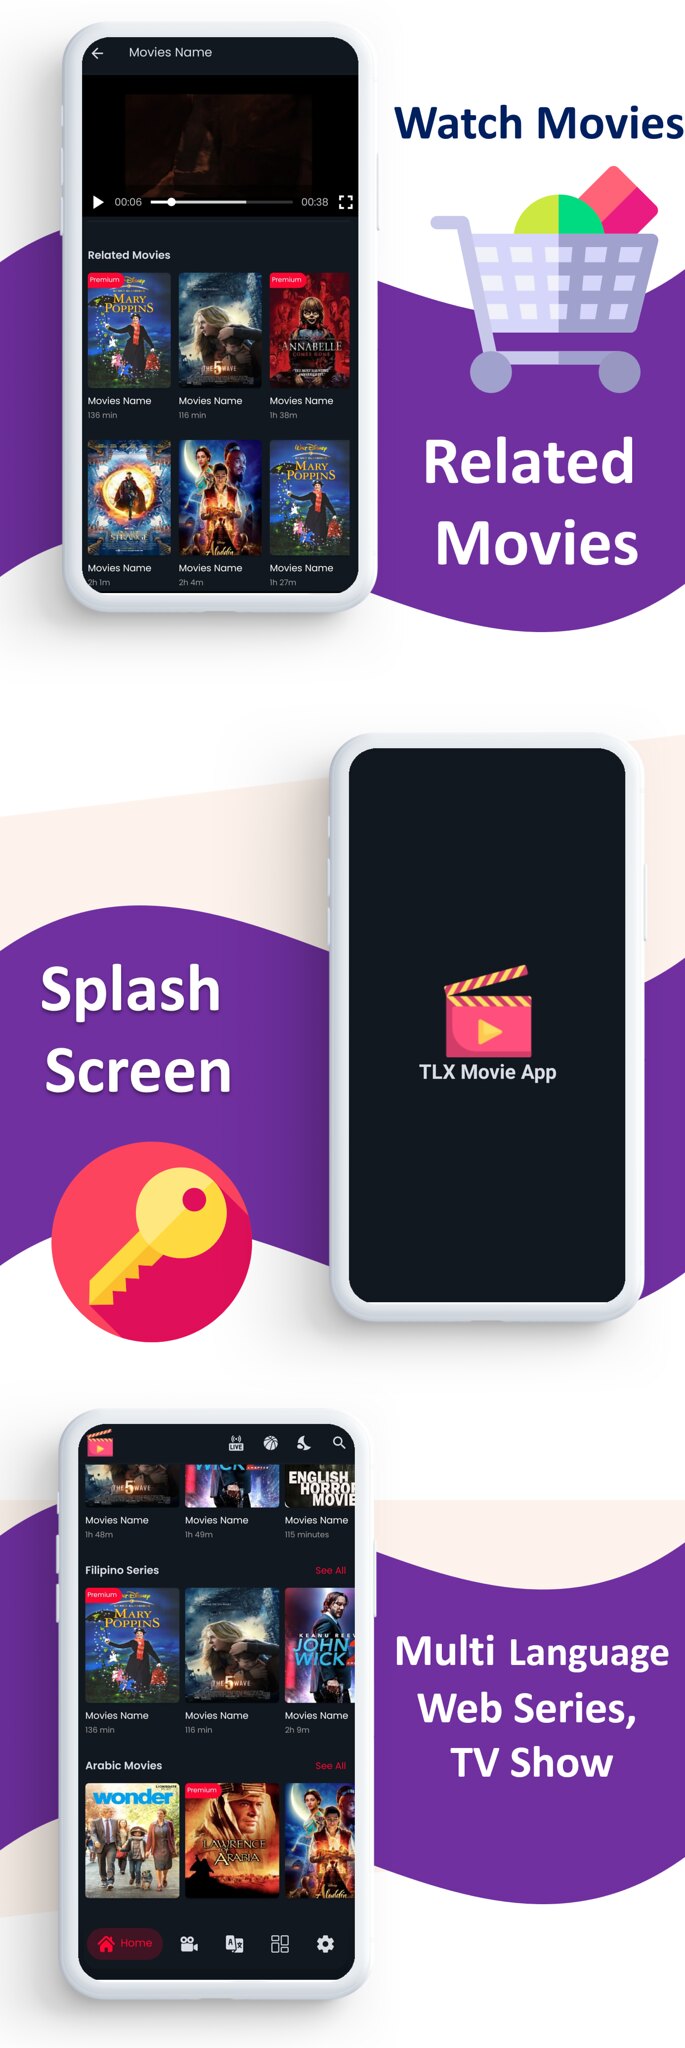 TLX Movies App | Web Series, Movies,  Videos Streaming, Live TV | Payment Gateways | Subscriptions - 4